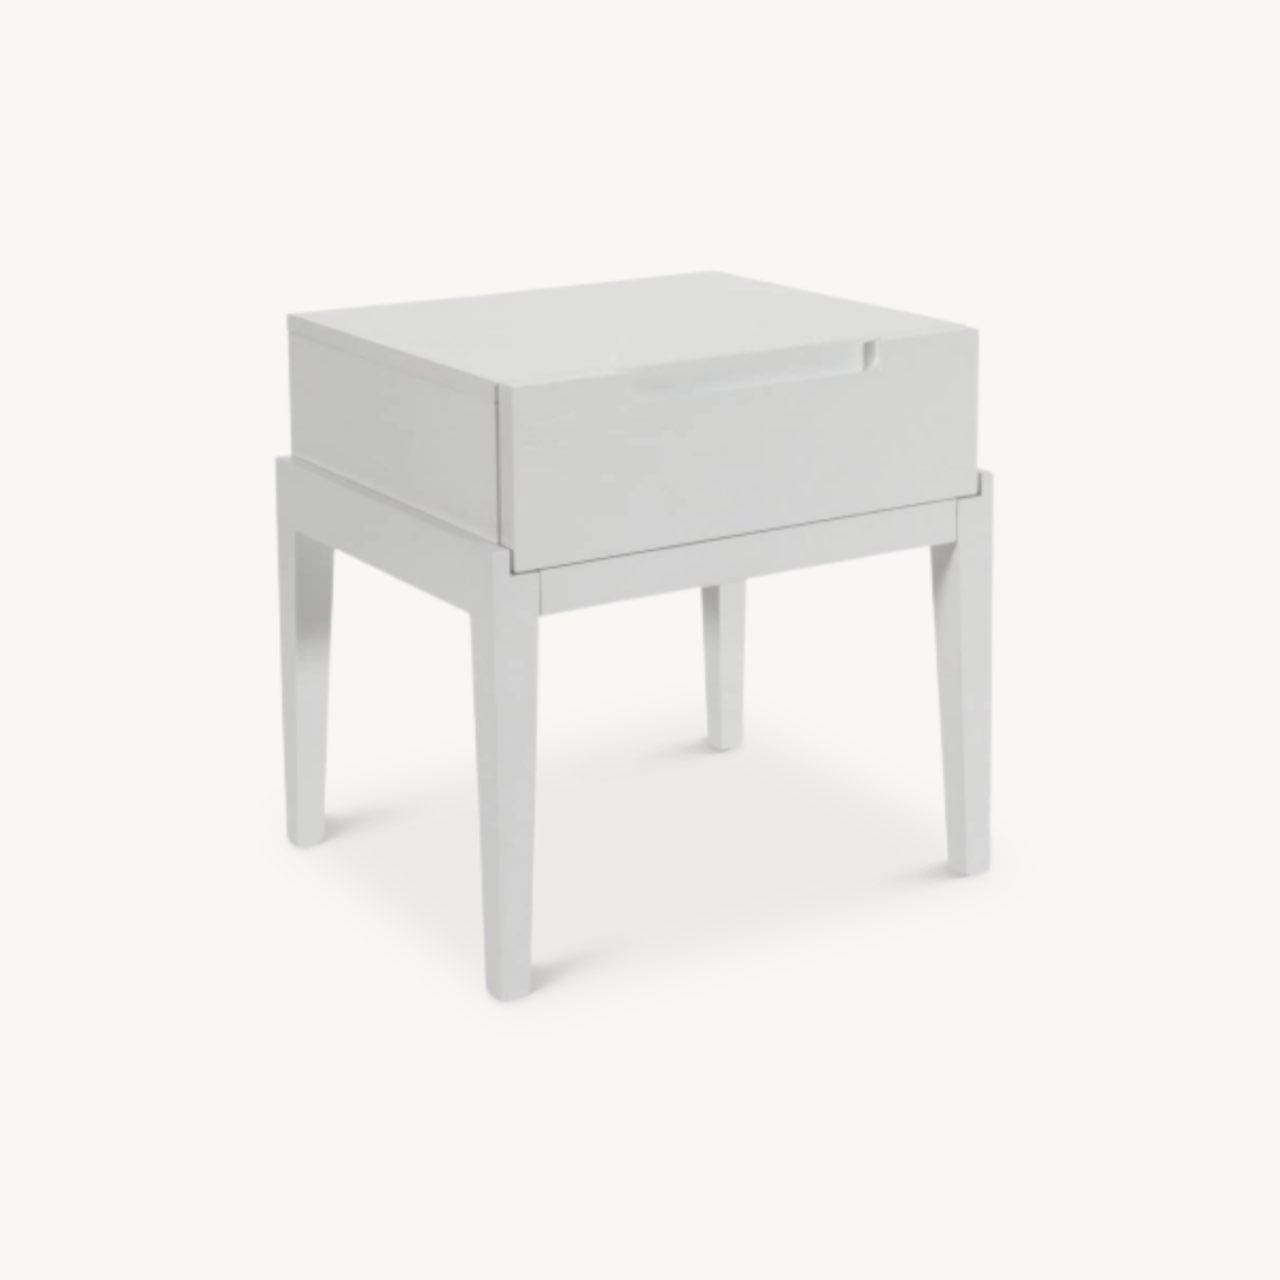 Modern white bedside table with one drawer